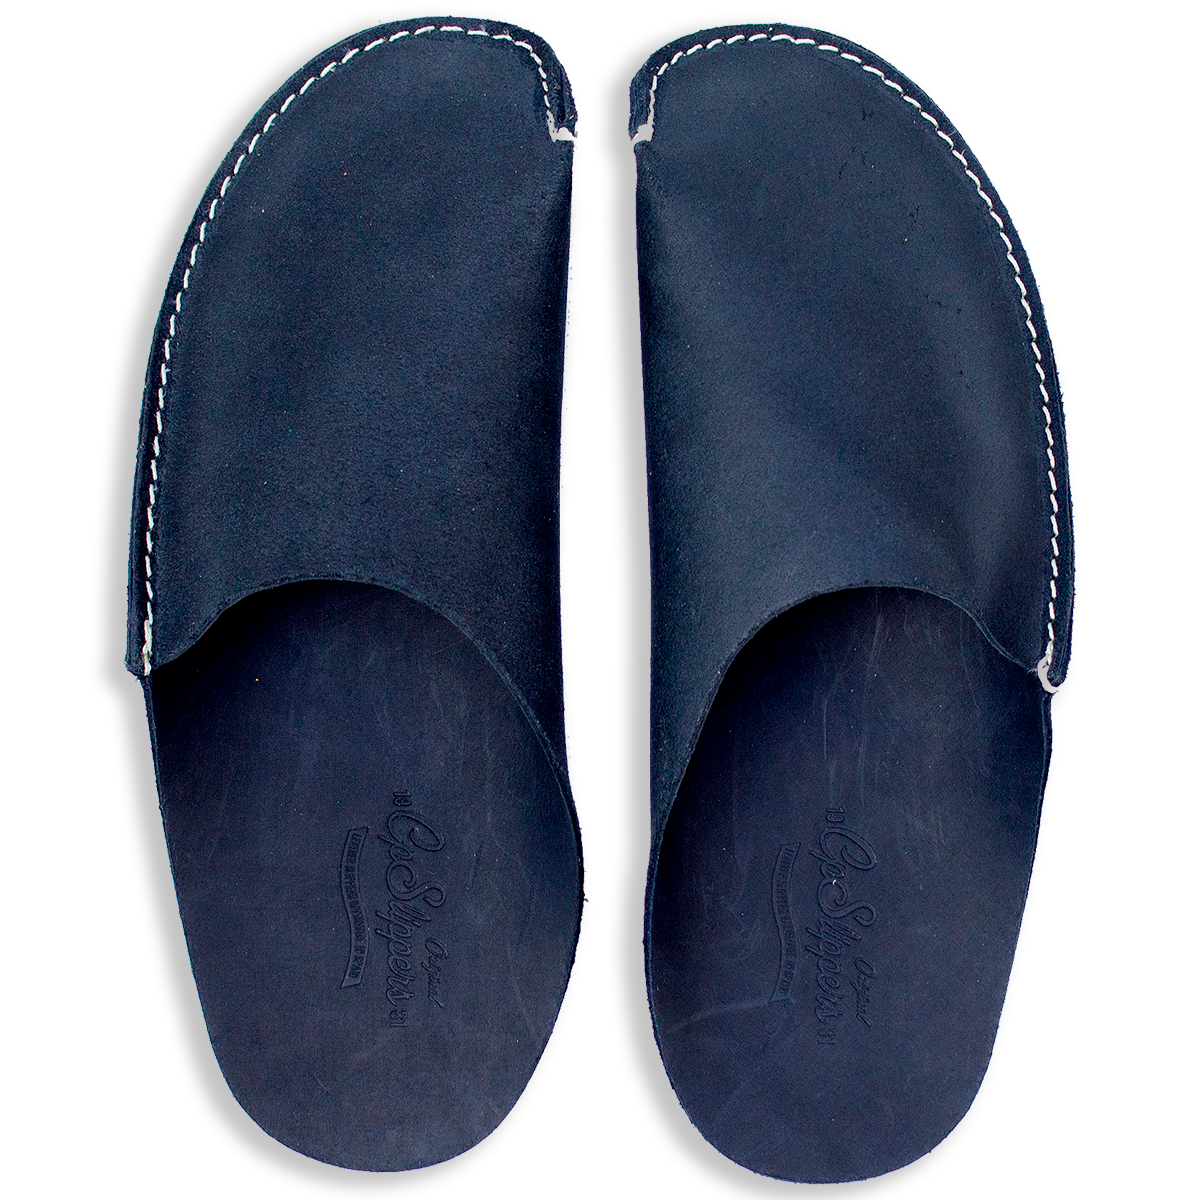 CP Slippers black leather minimalist home shoes